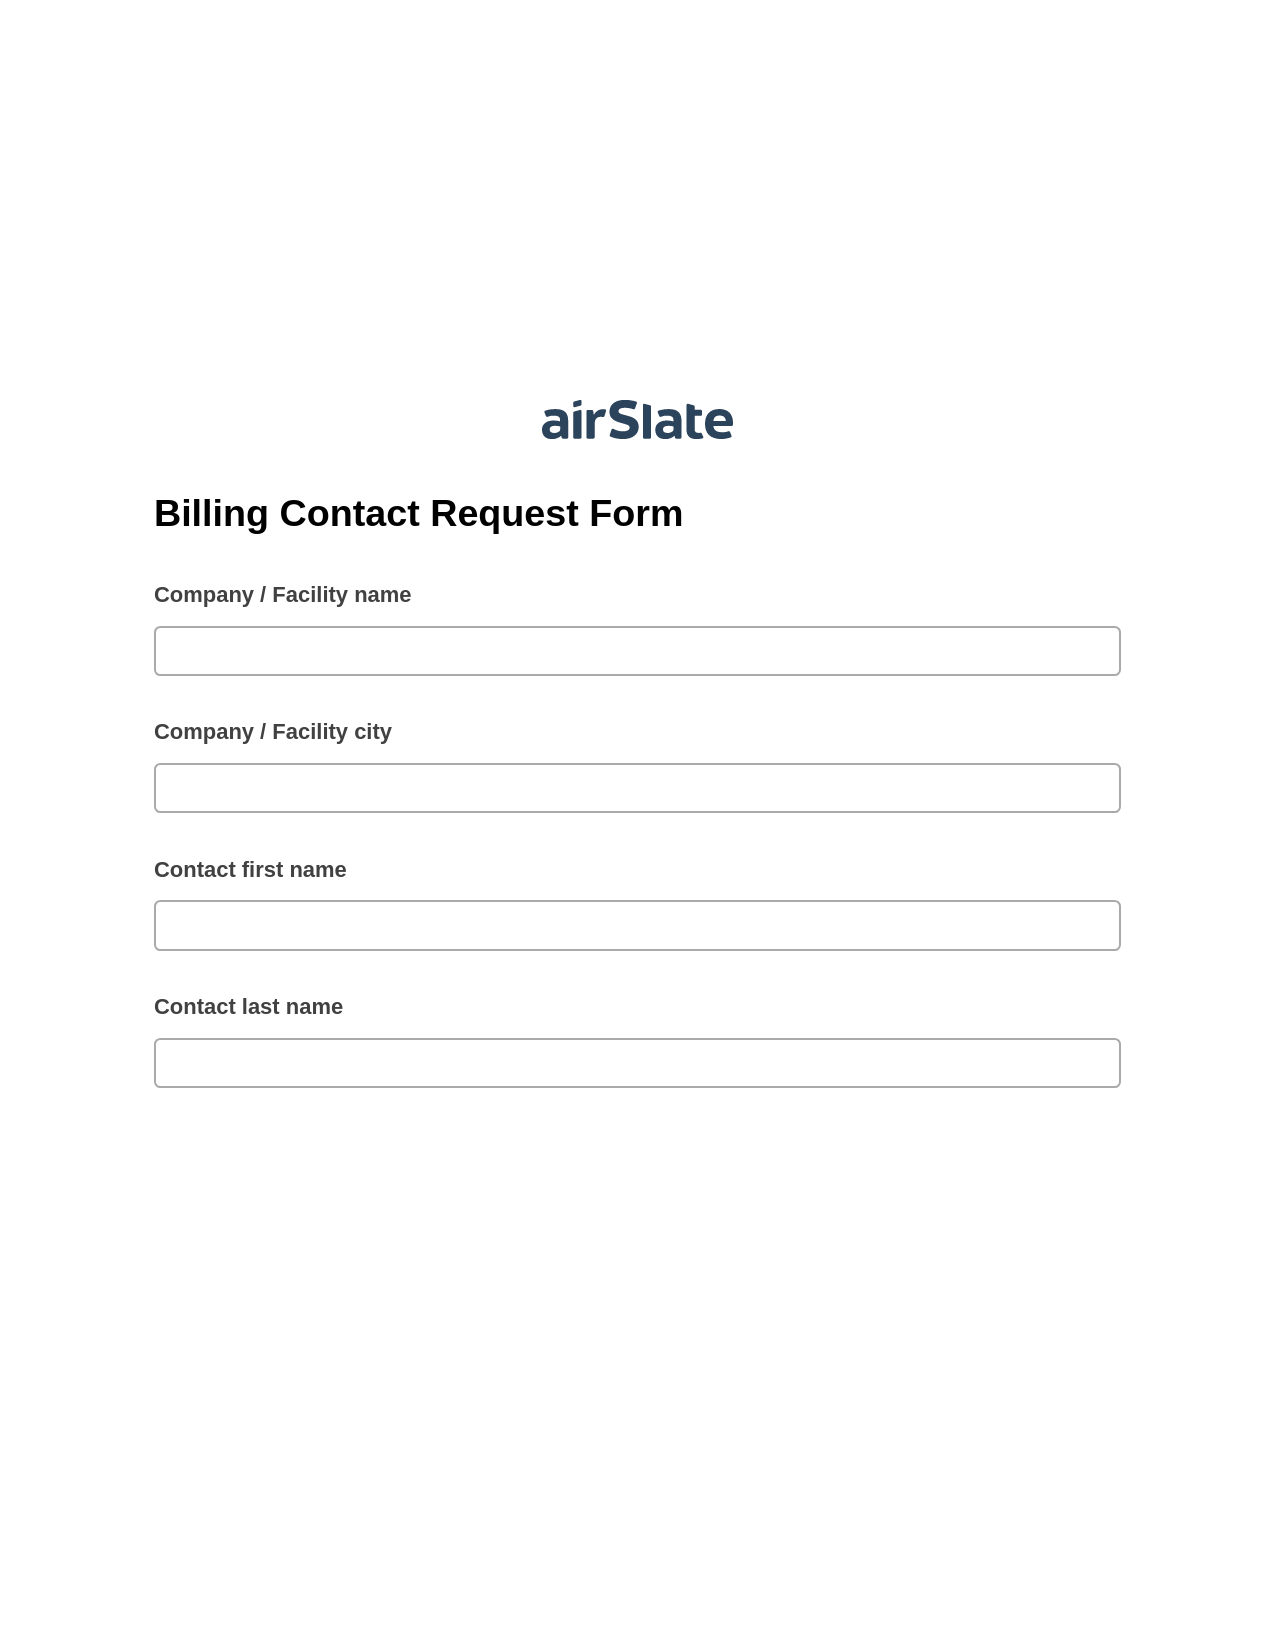 Multirole Billing Contact Request Form Pre-fill Slate from MS Dynamics 365 Records Bot, Hide Signatures Bot, Export to Salesforce Bot